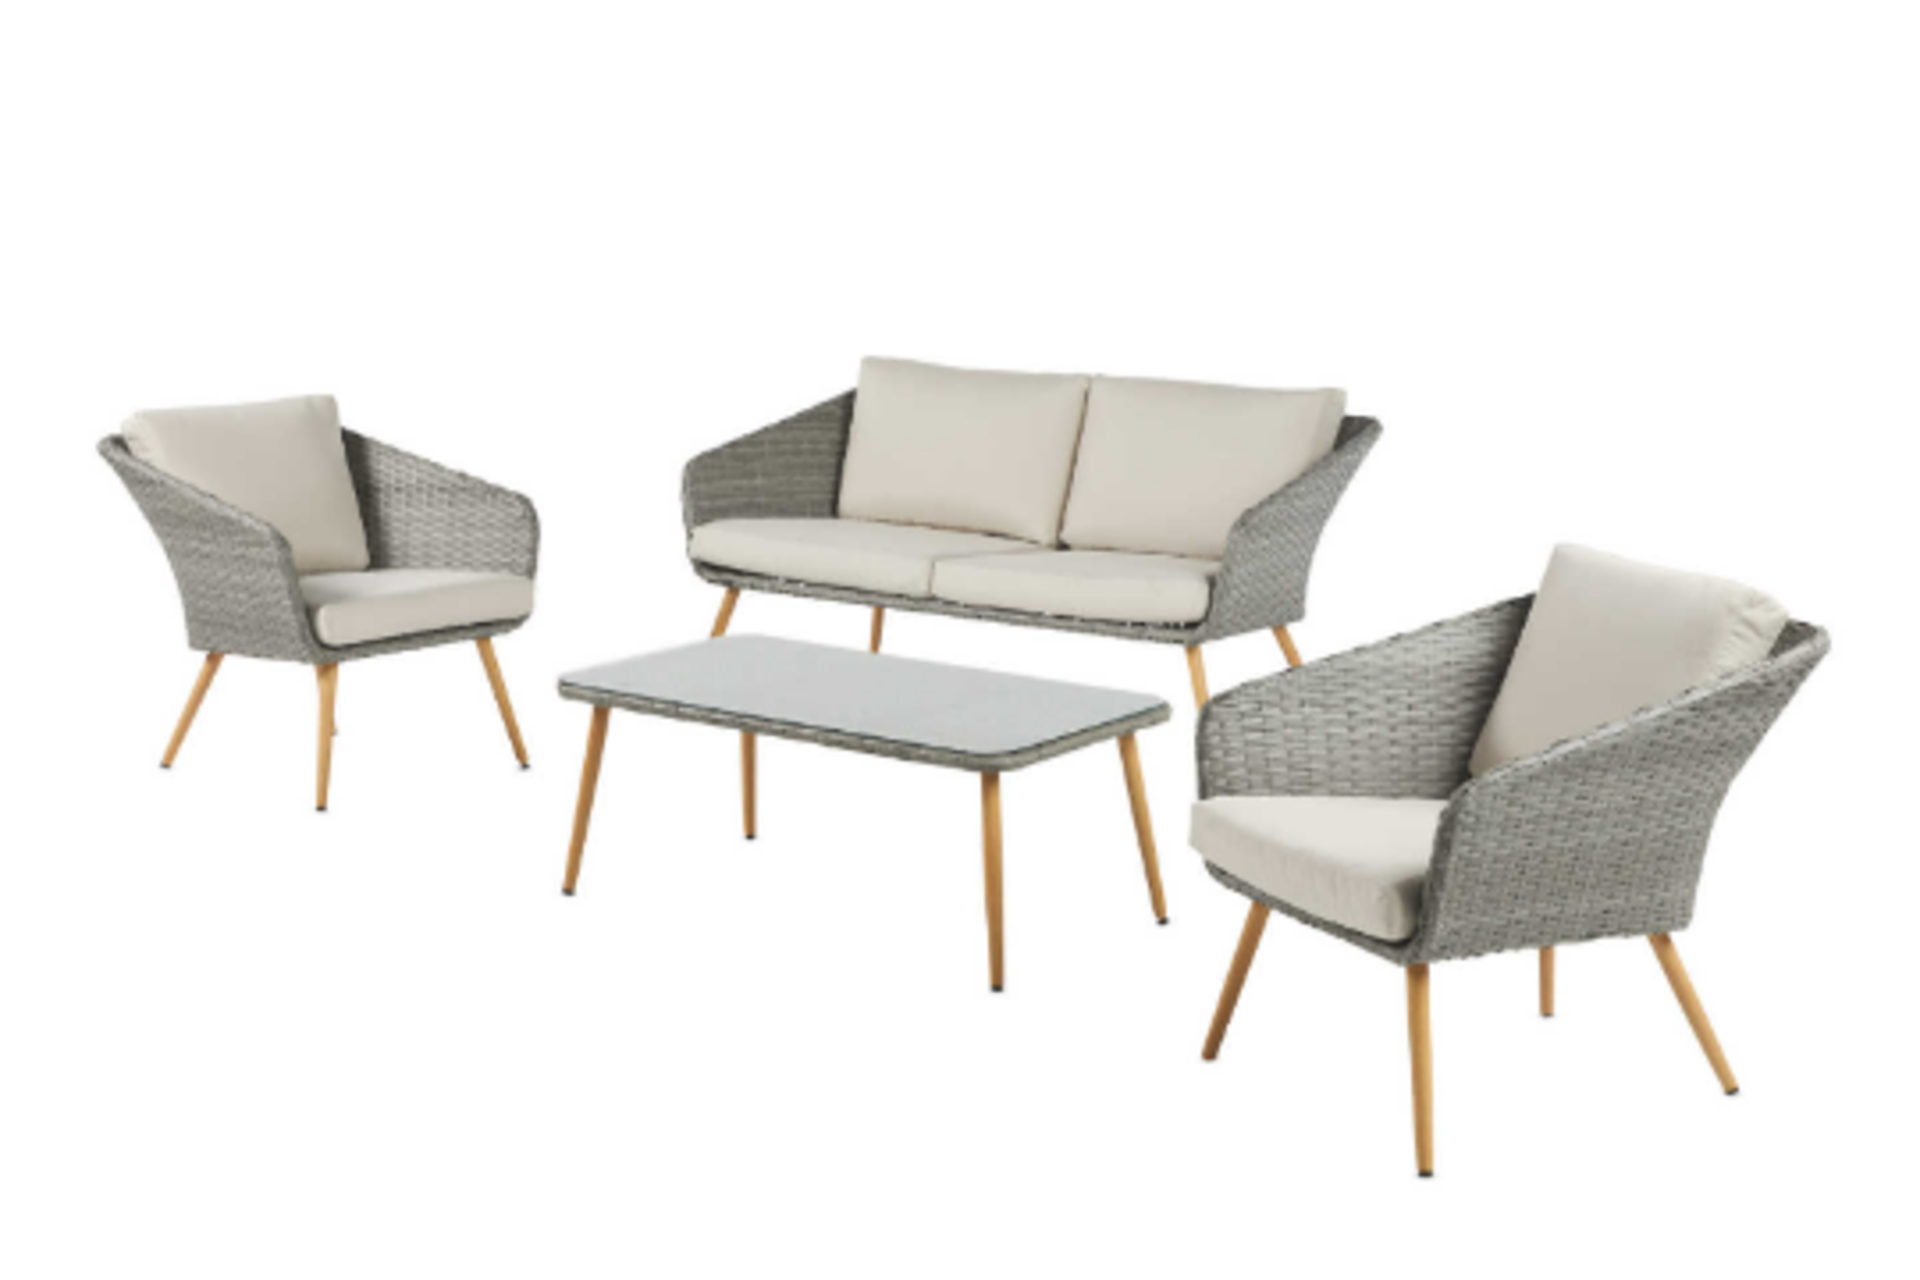 Luxury Rattan Coffee Set. Enjoy those lazy days in the sun whilst relaxing on the Rattan Coffee Set.